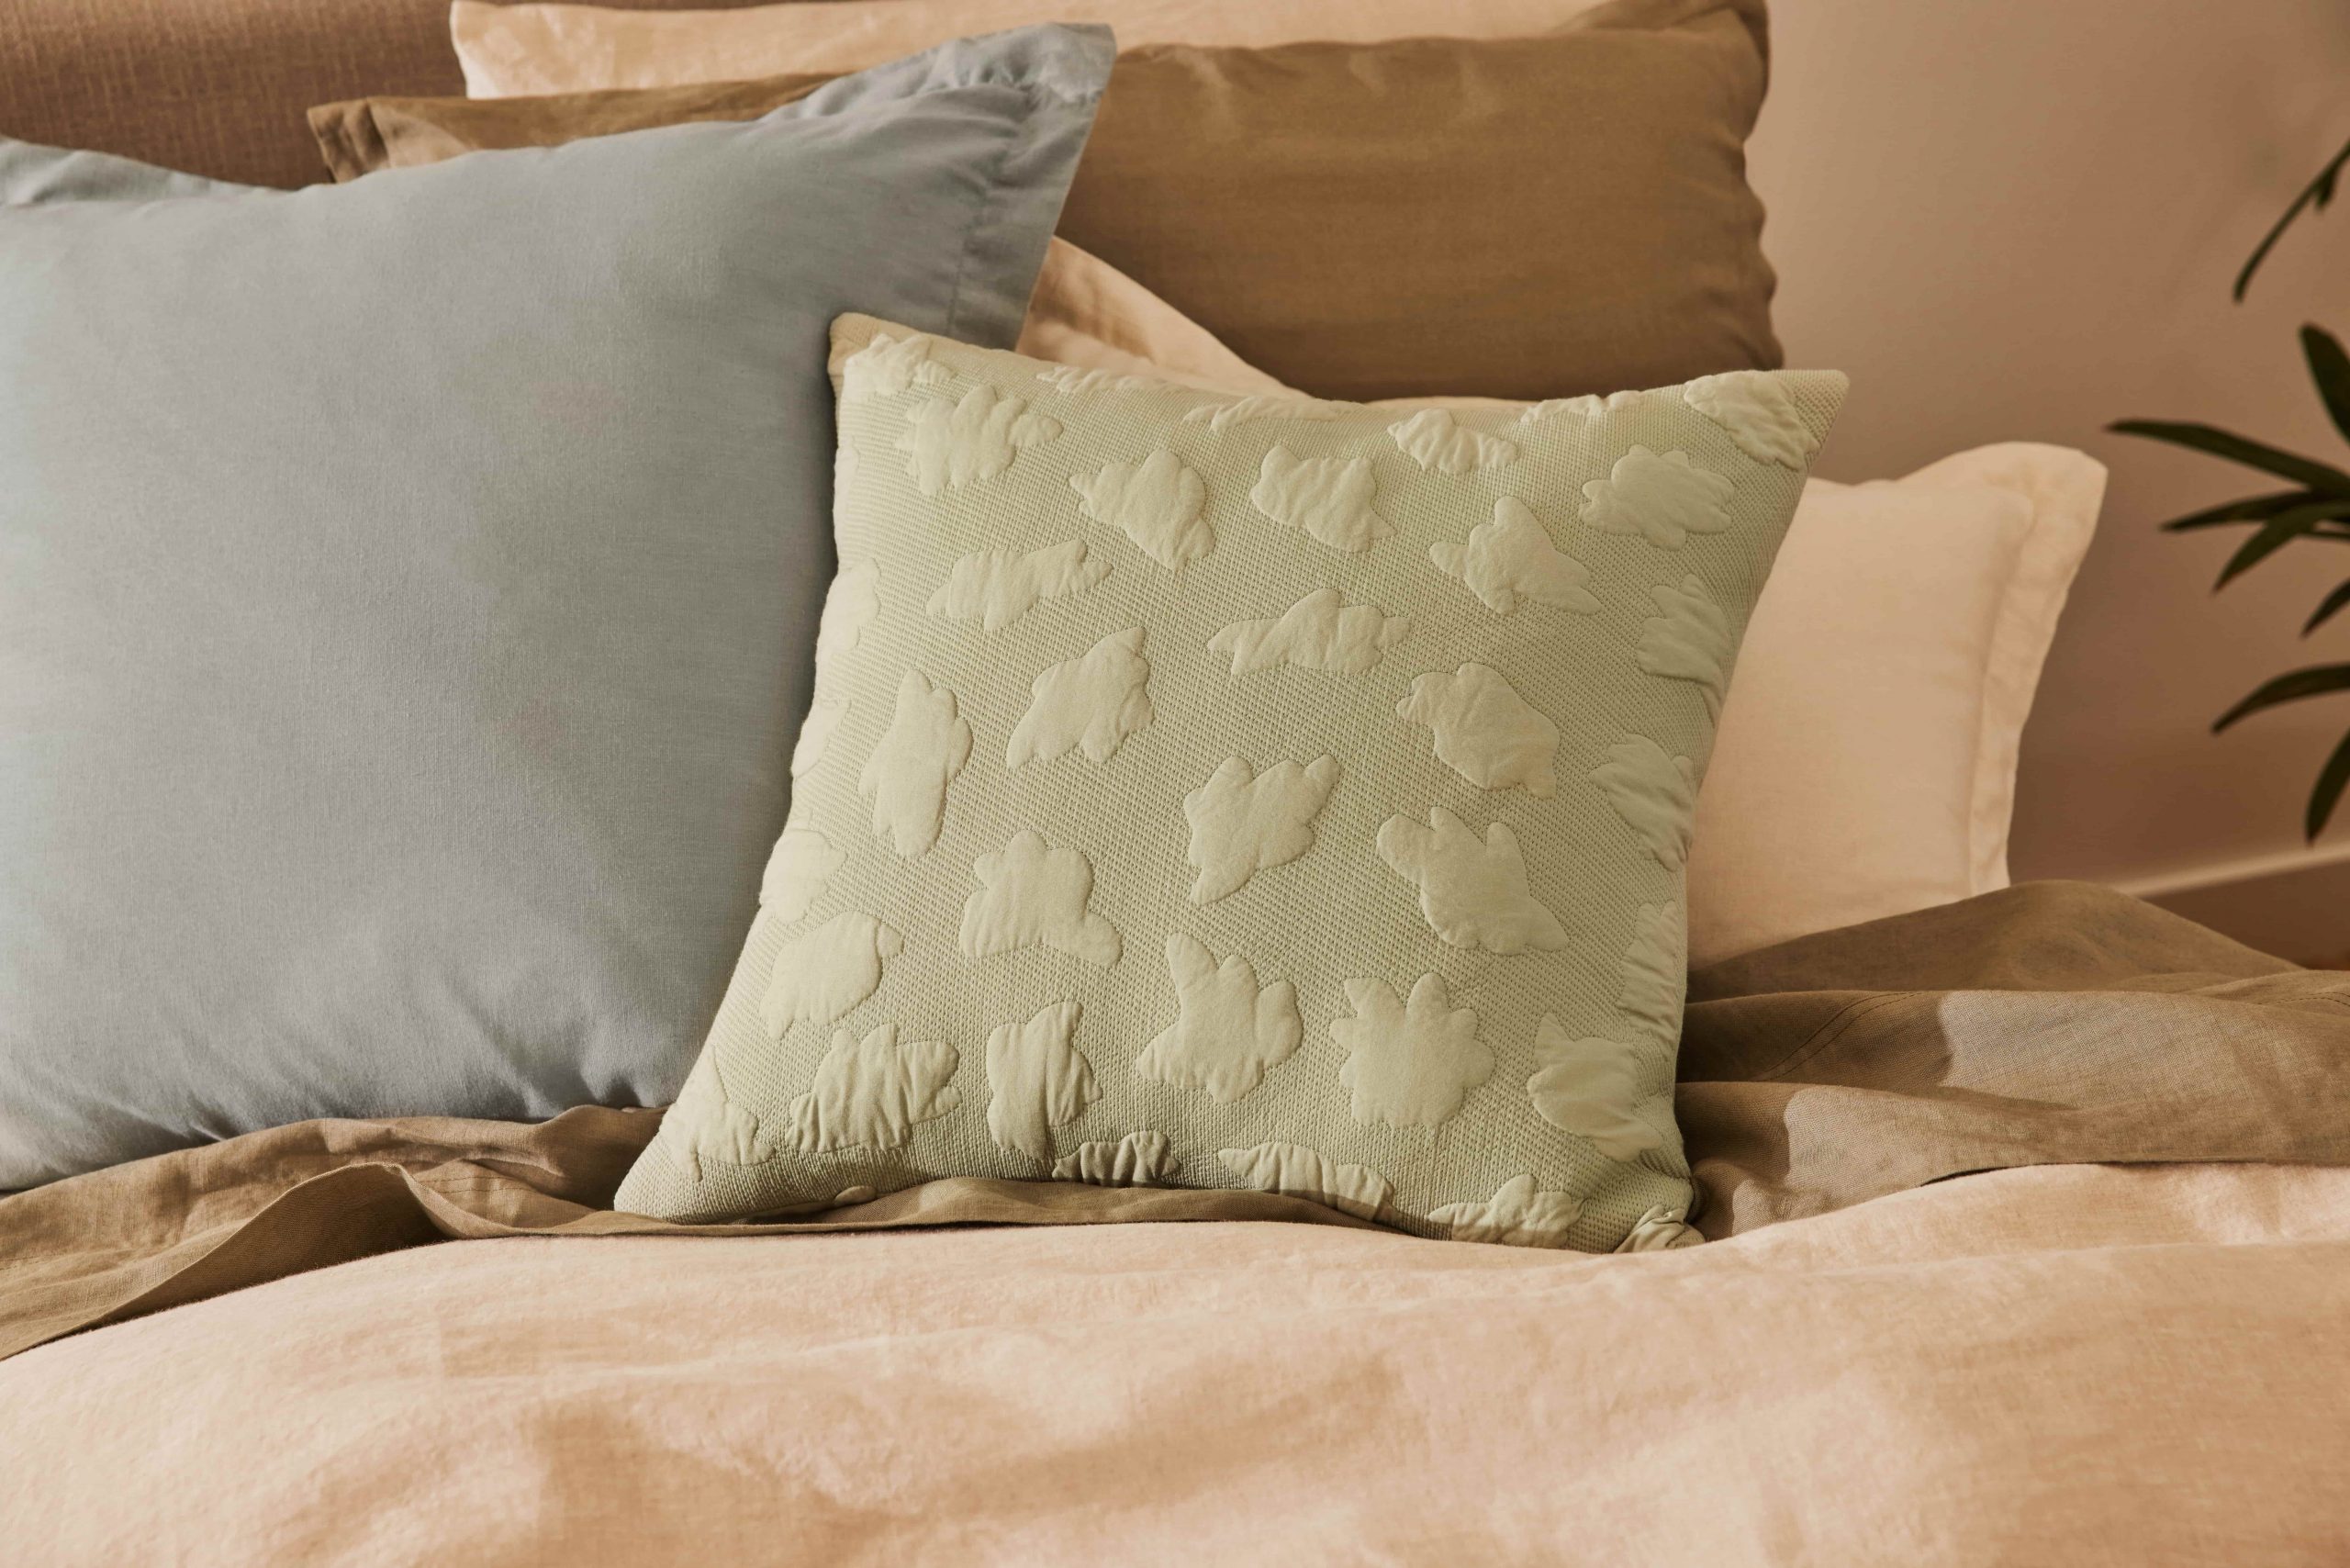 A light green cushion with cloud patterns in front of a steel blue cushion